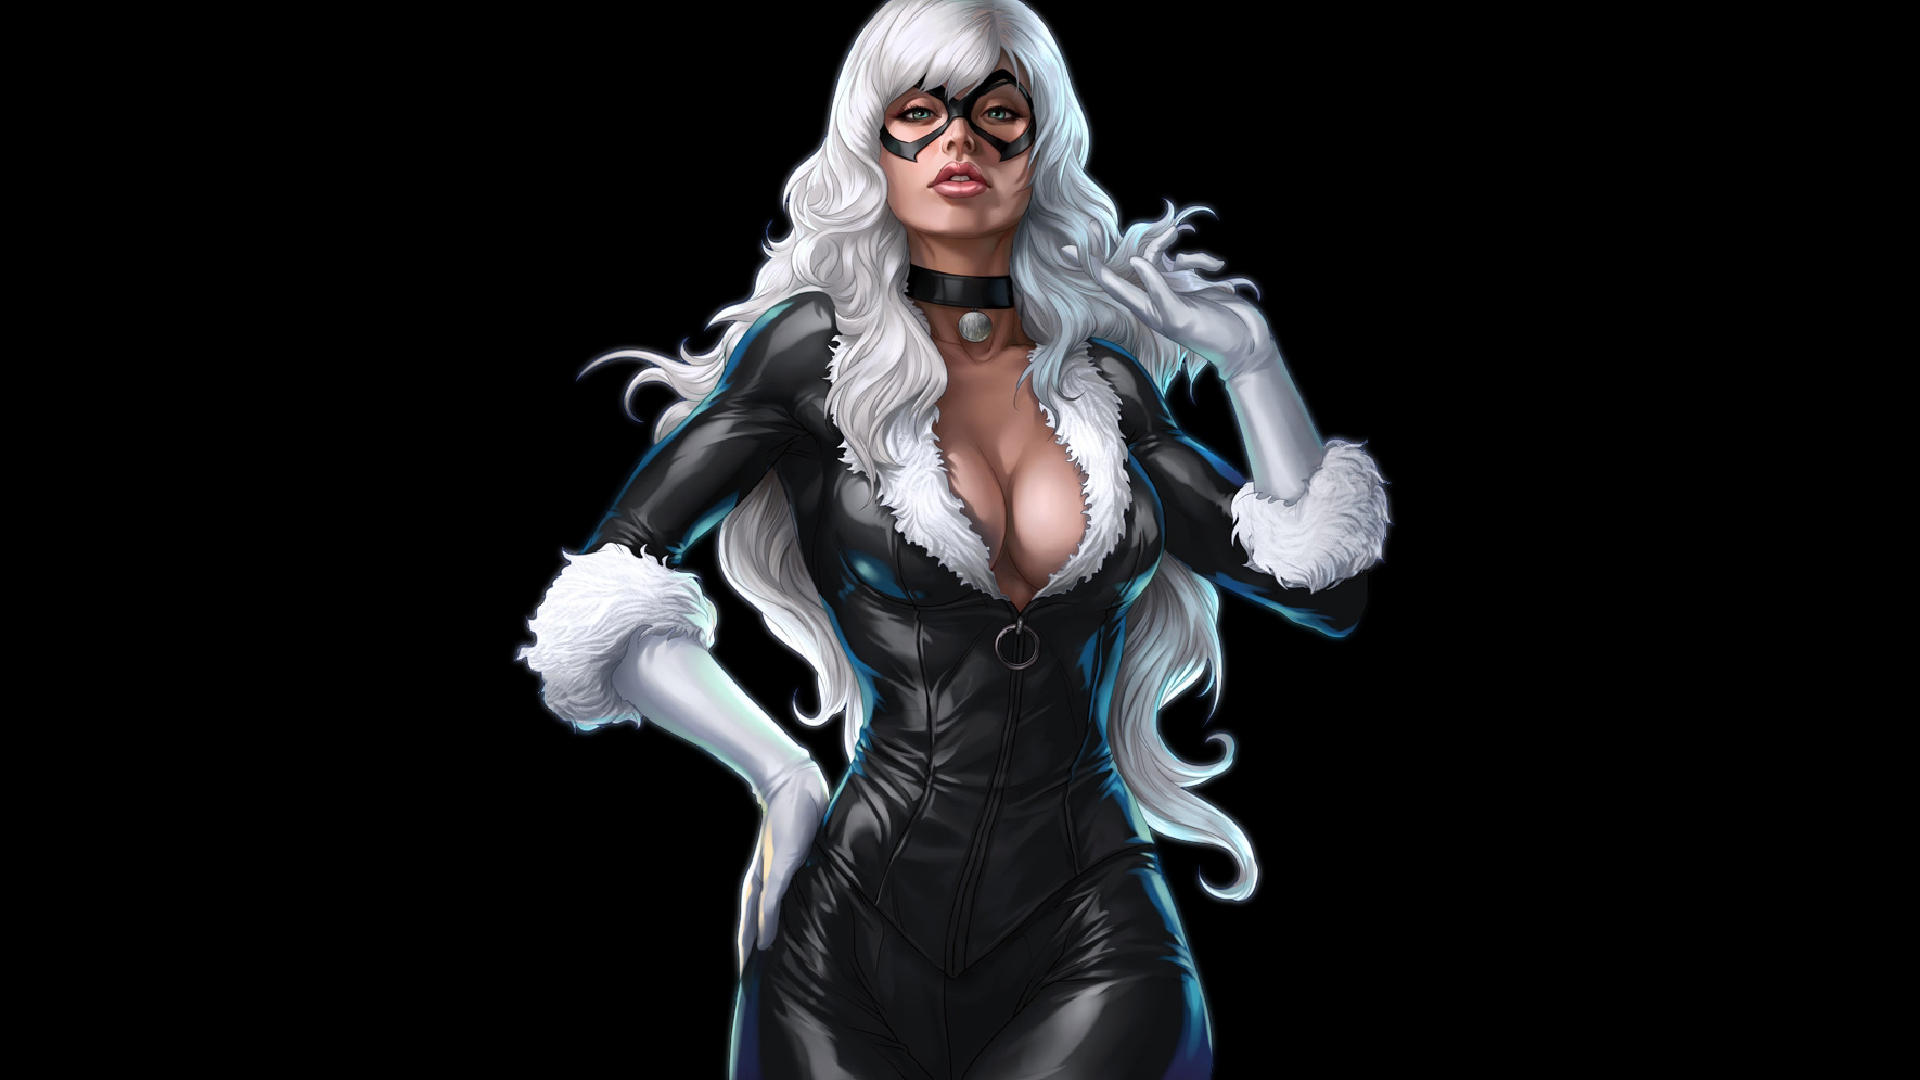  Black  Cat  Wallpapers  Pictures Images